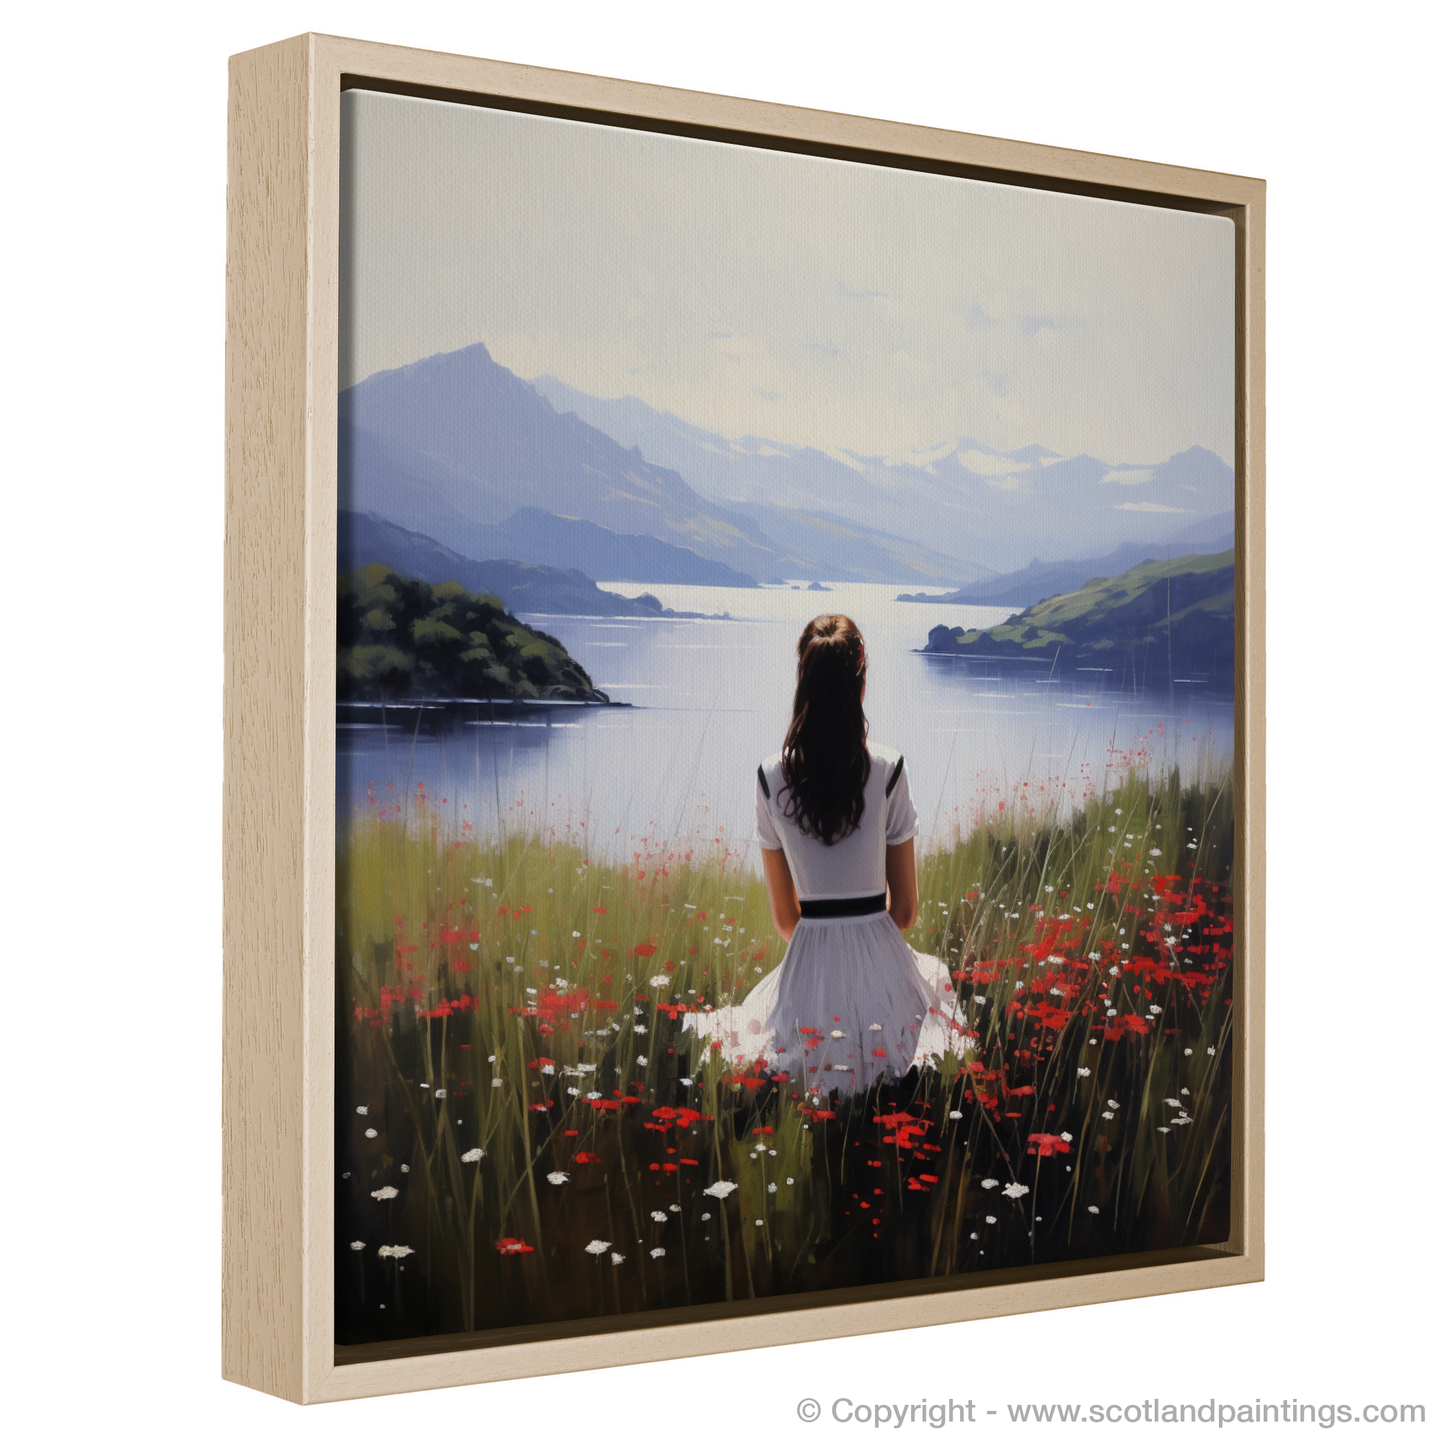 Painting and Art Print of Wildflowers by Loch Lomond entitled "Wildflowers by Loch Lomond: A Tranquil Scottish Retreat".